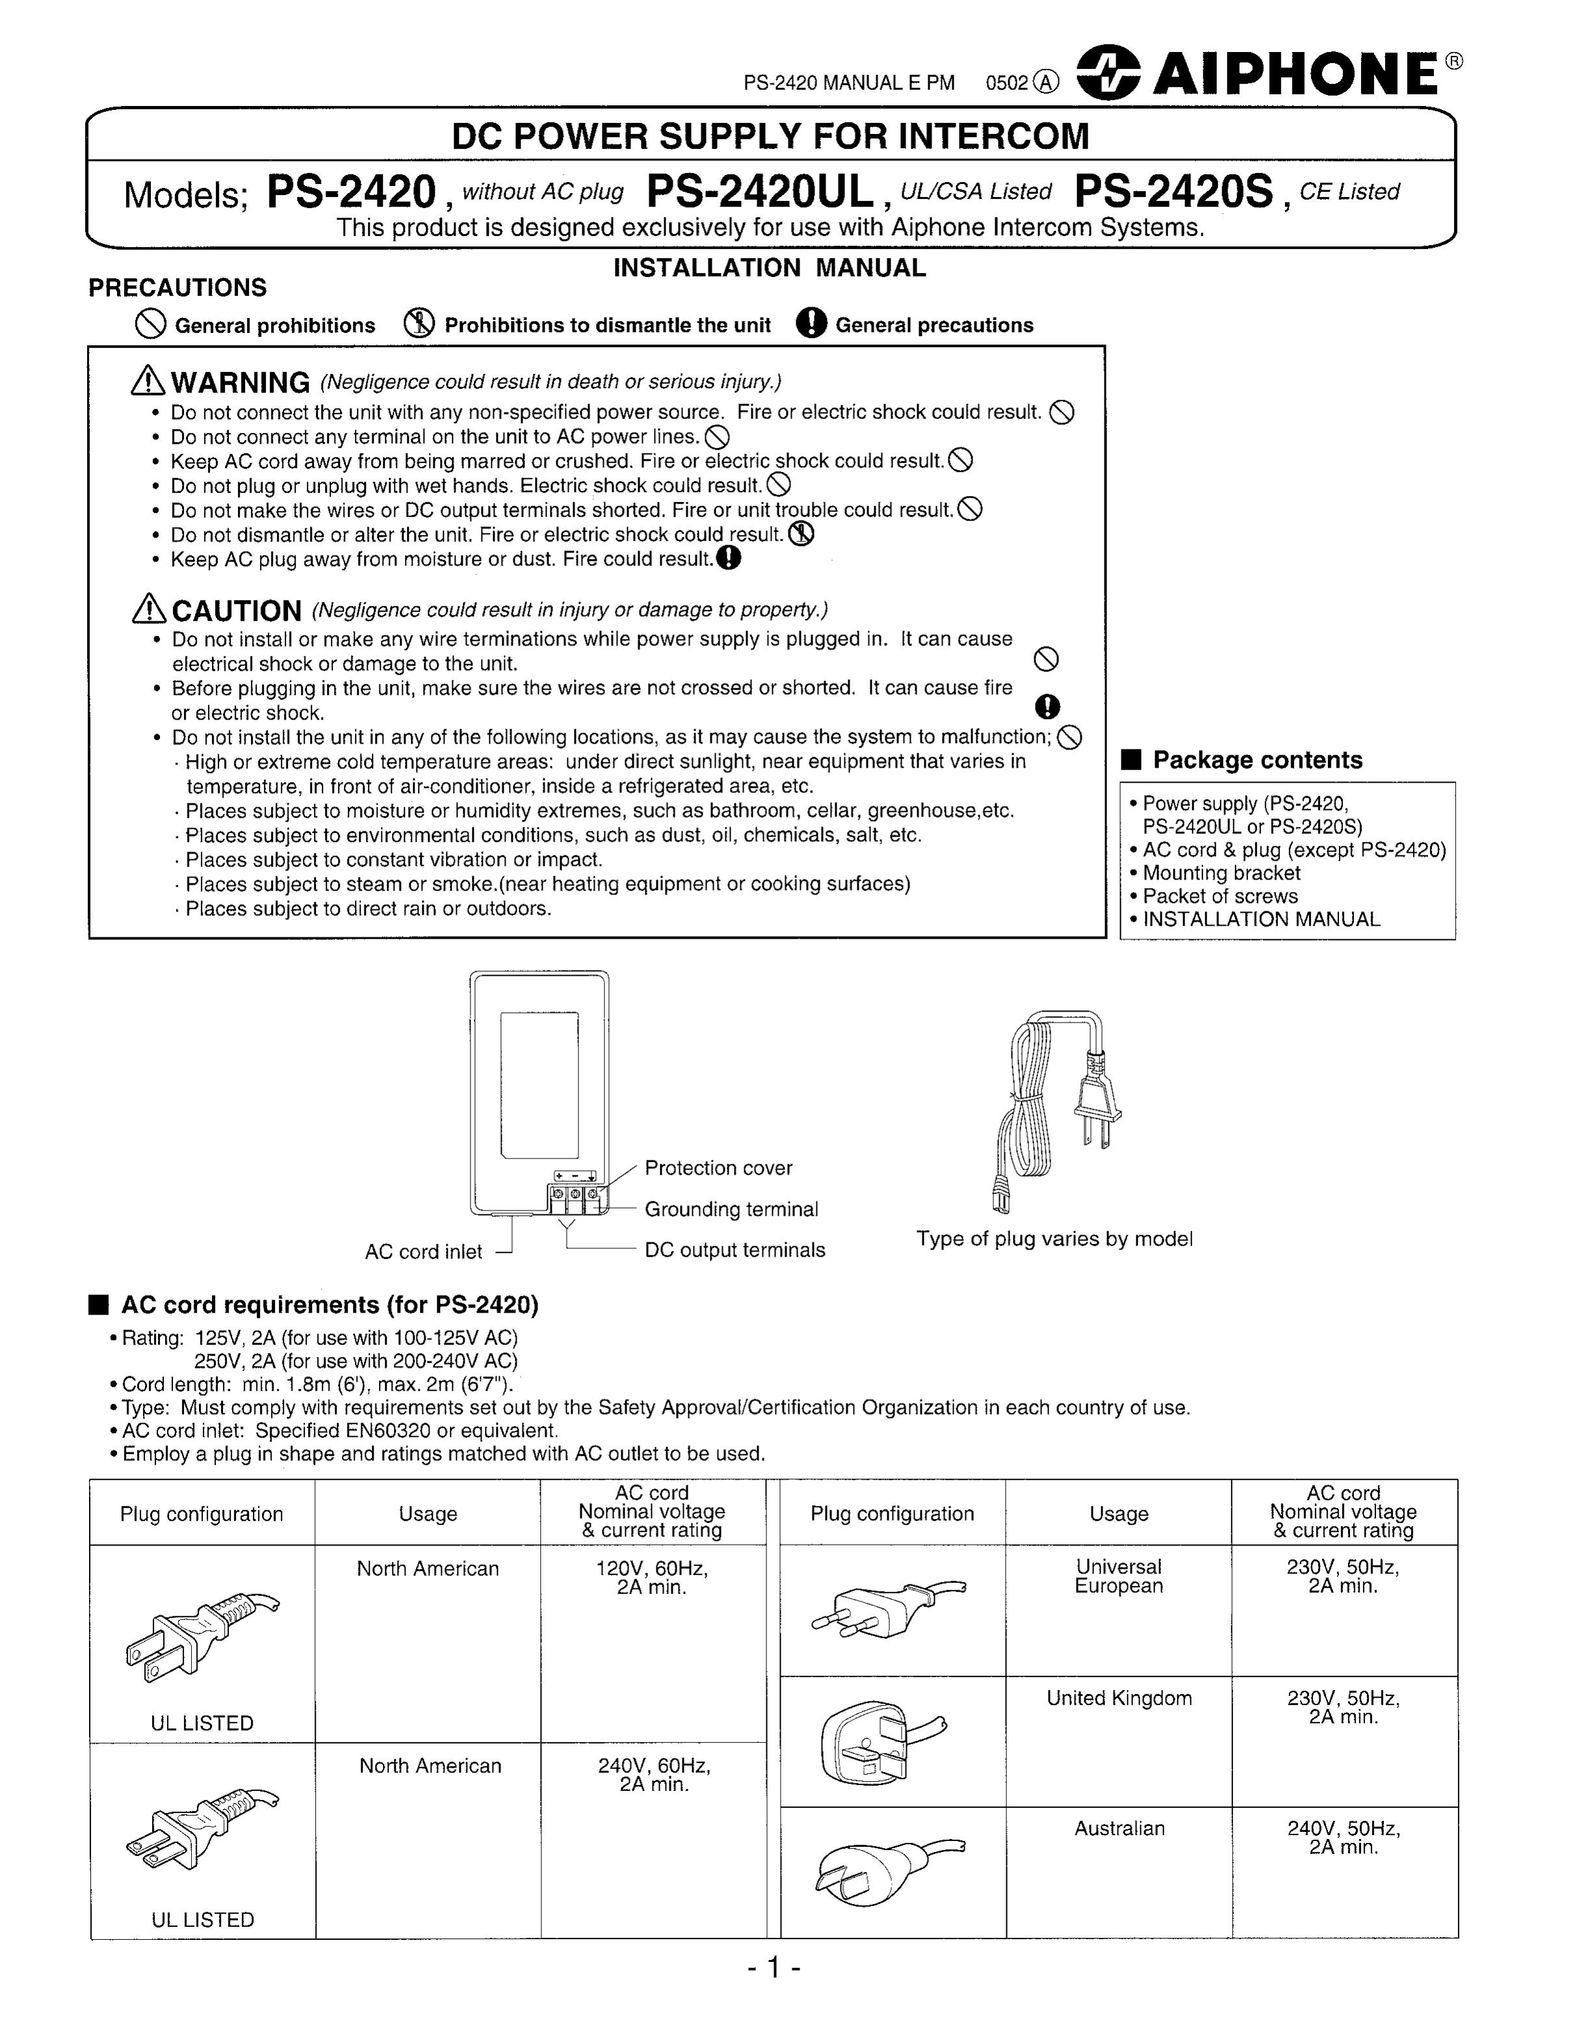 Aiphone PS-2420 Power Supply User Manual